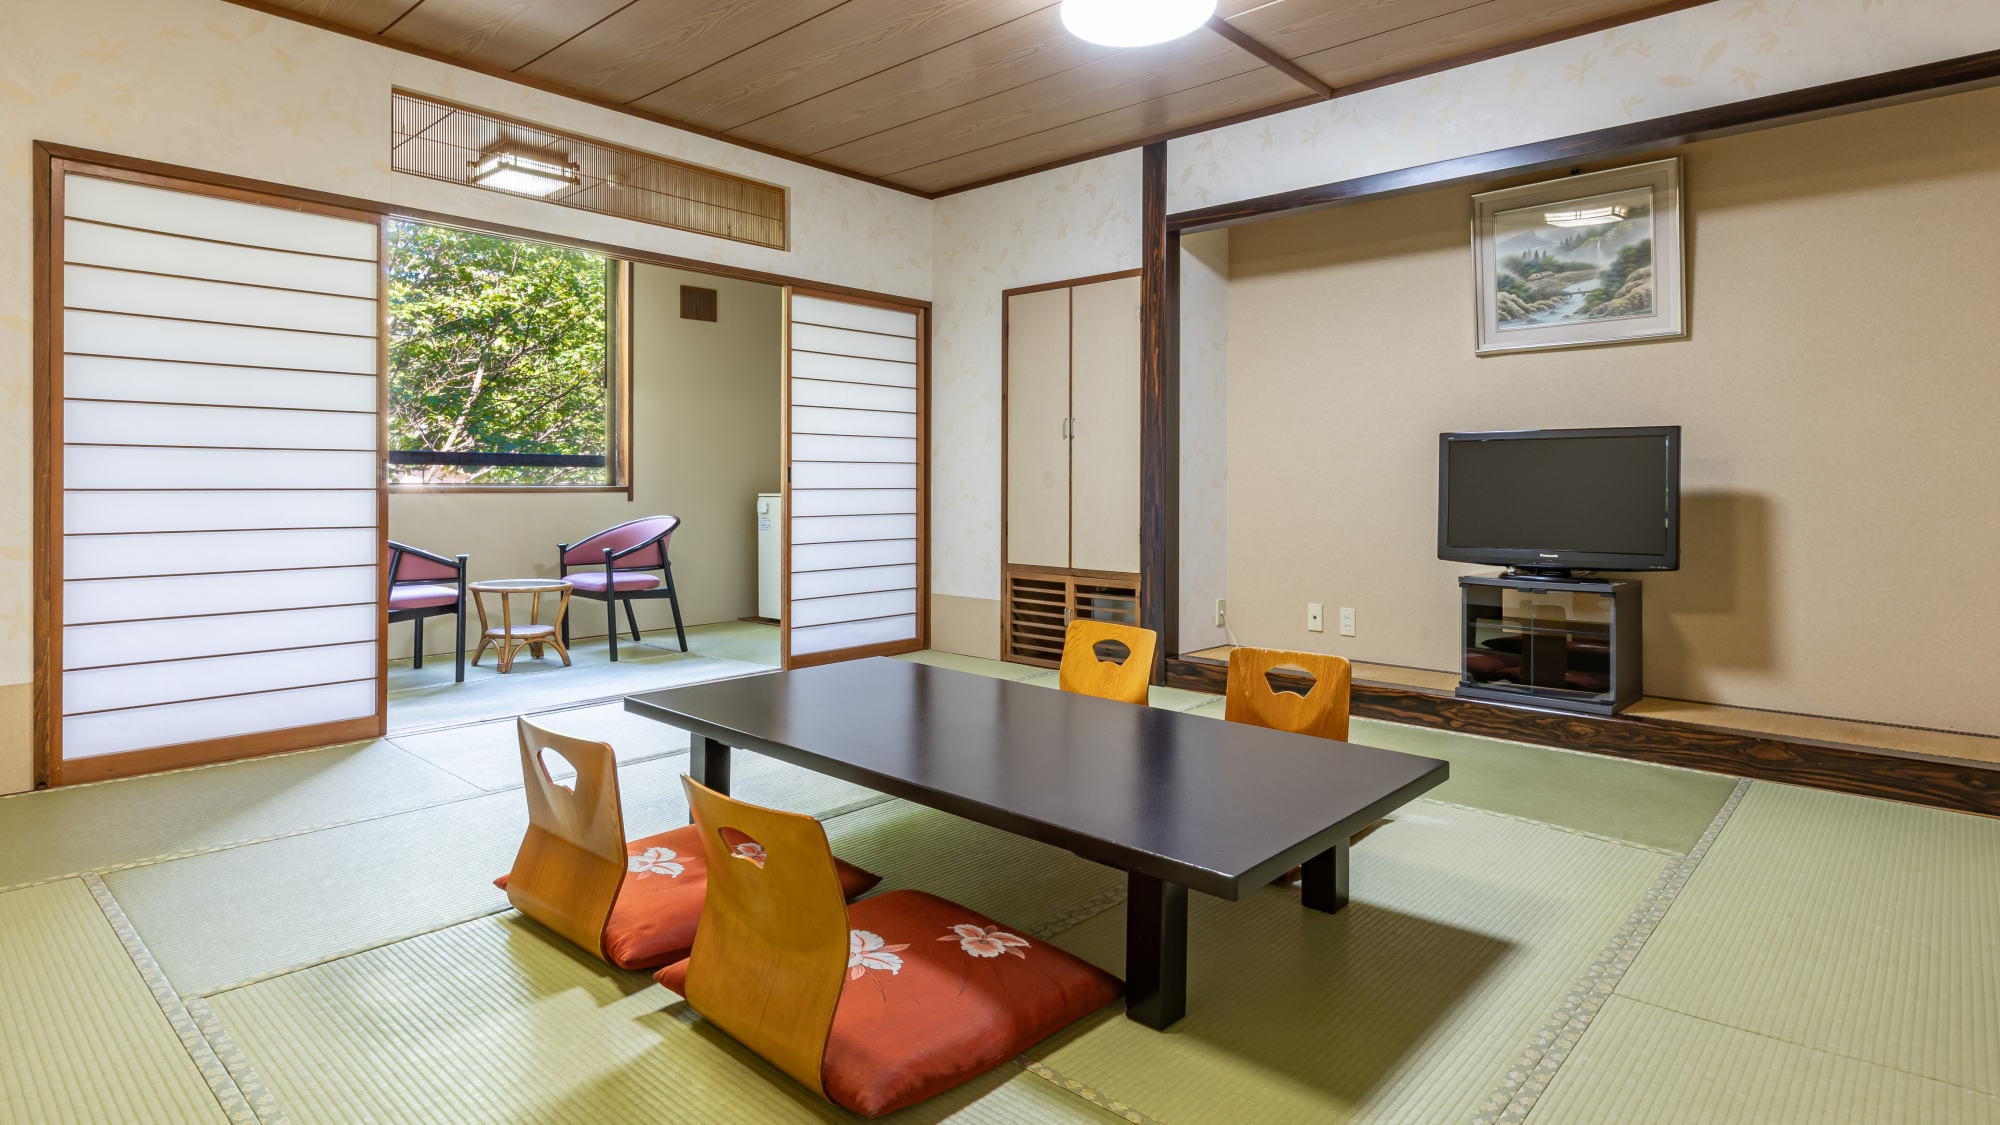 [West Building Japanese Style Room] This is a guest room in a building located between the main building and the east building. The first floor is a large public bath.